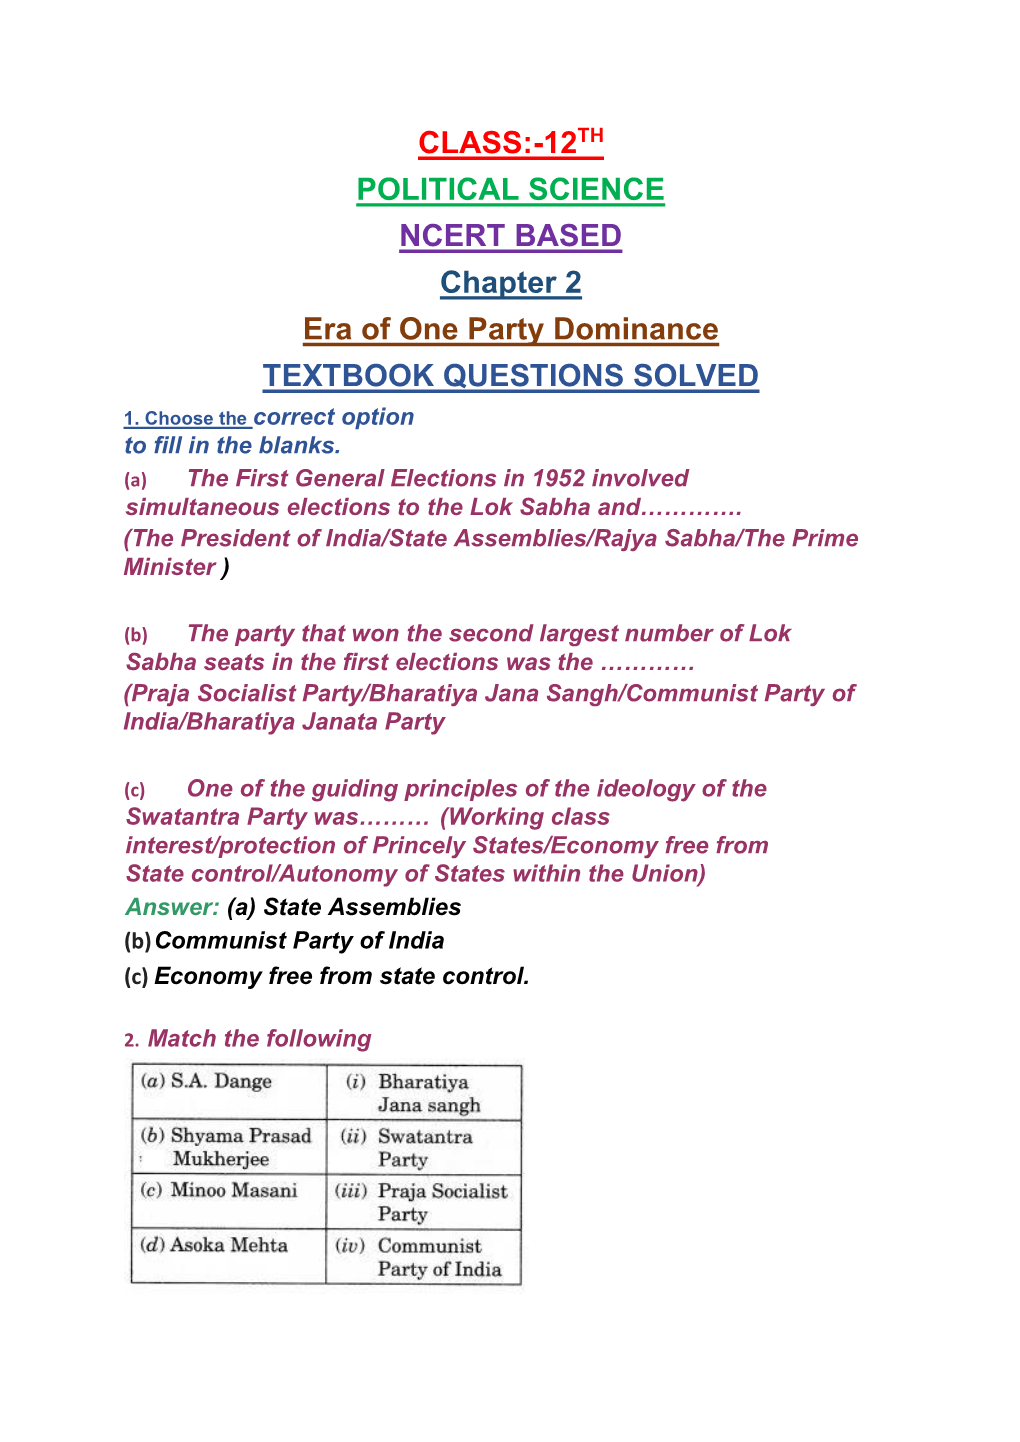 CLASS:-12TH POLITICAL SCIENCE NCERT BASED Chapter 2 Era of One Party Dominance TEXTBOOK QUESTIONS SOLVED